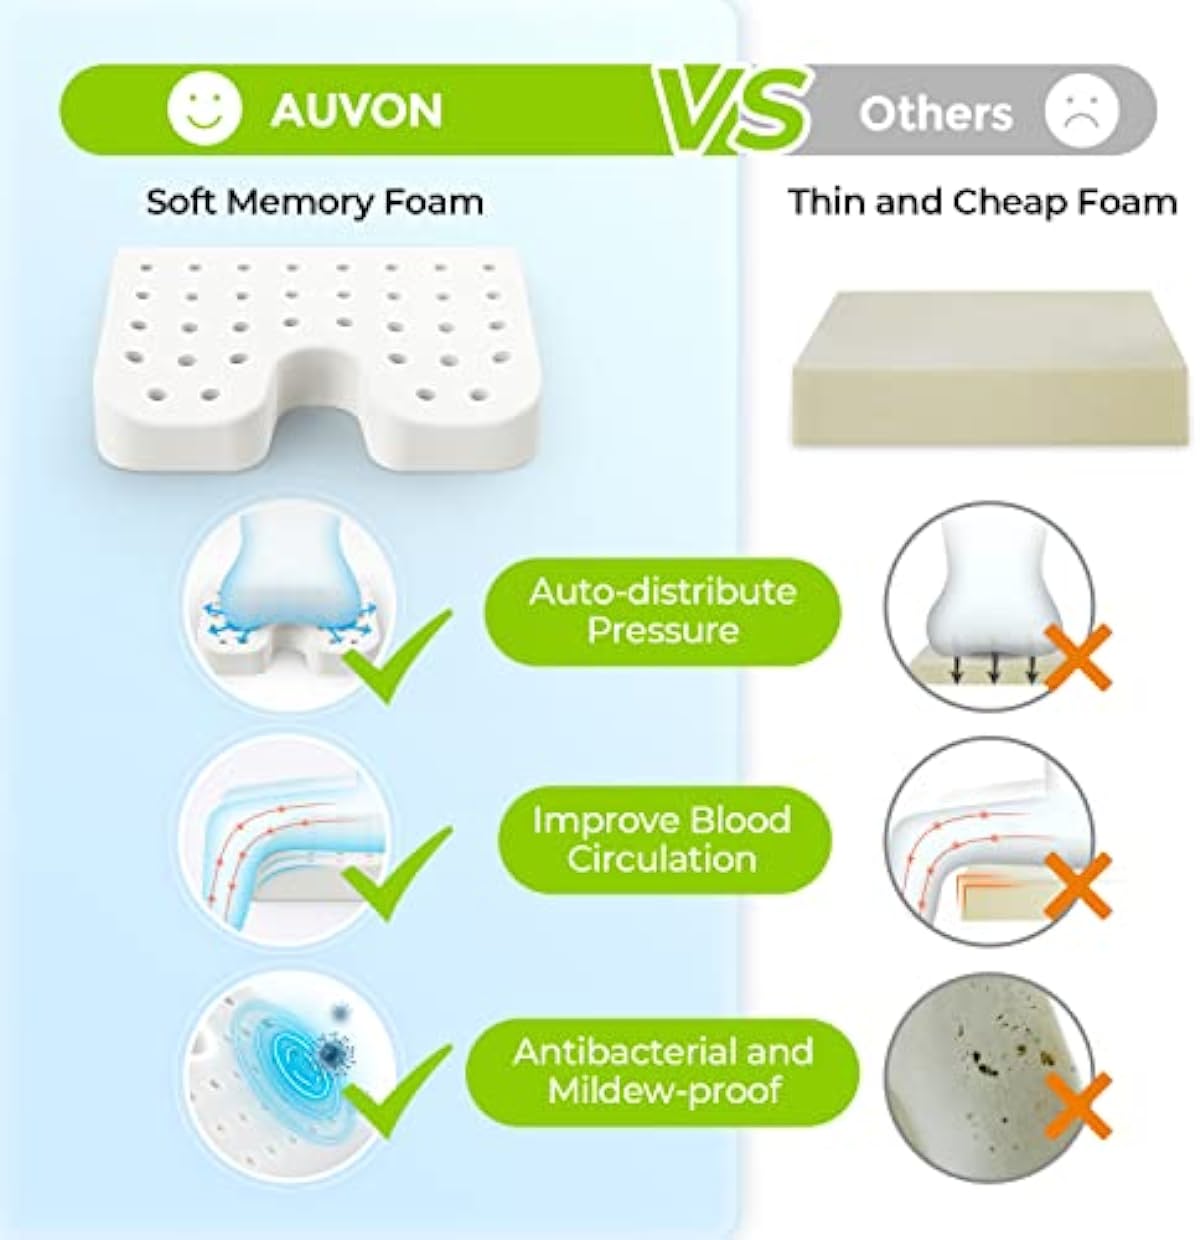 AUVON Wheelchair Seat Cushions for Sciatica, Back, Coccyx, Pressure Sore and Ulcer Pain Relief, Memory Foam Pressure Relief Cushion with Detachable Safety Strap, Breathable Fabric, Waterproof Fabric